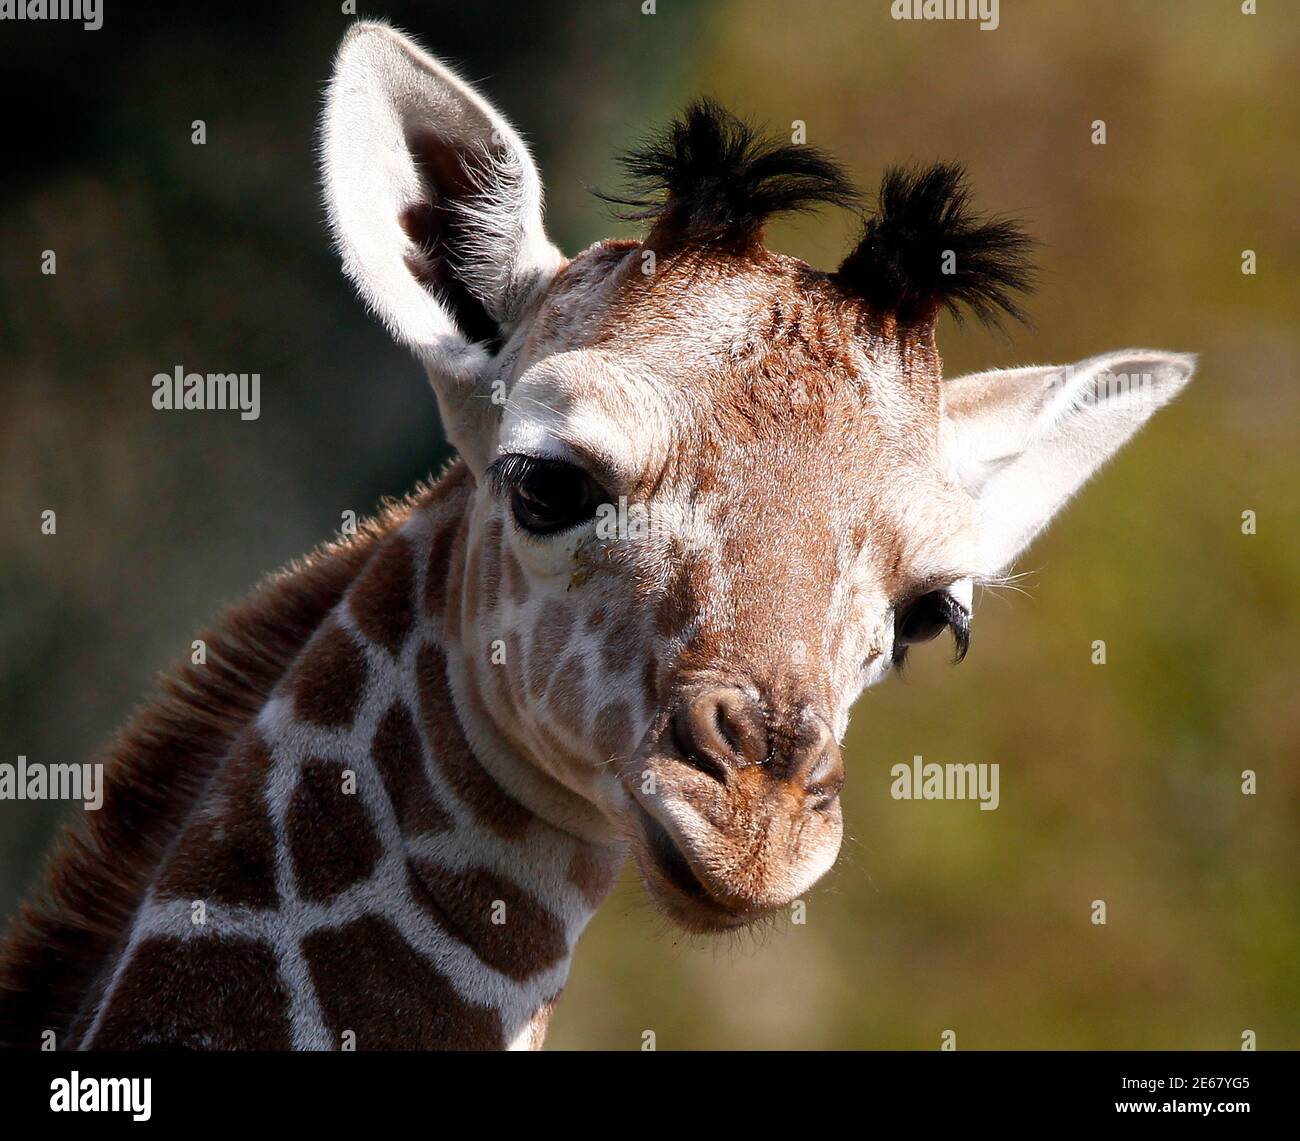 A two weeks old giraffe baby is pictured in his enclosure at the Tierpark Hellabrunn in Munich April 17, 2011. The female giraffe was born on April 5, 2011.  REUTERS/Michael Dalder    (GERMANY - Tags: ANIMALS ENVIRONMENT) Stock Photo